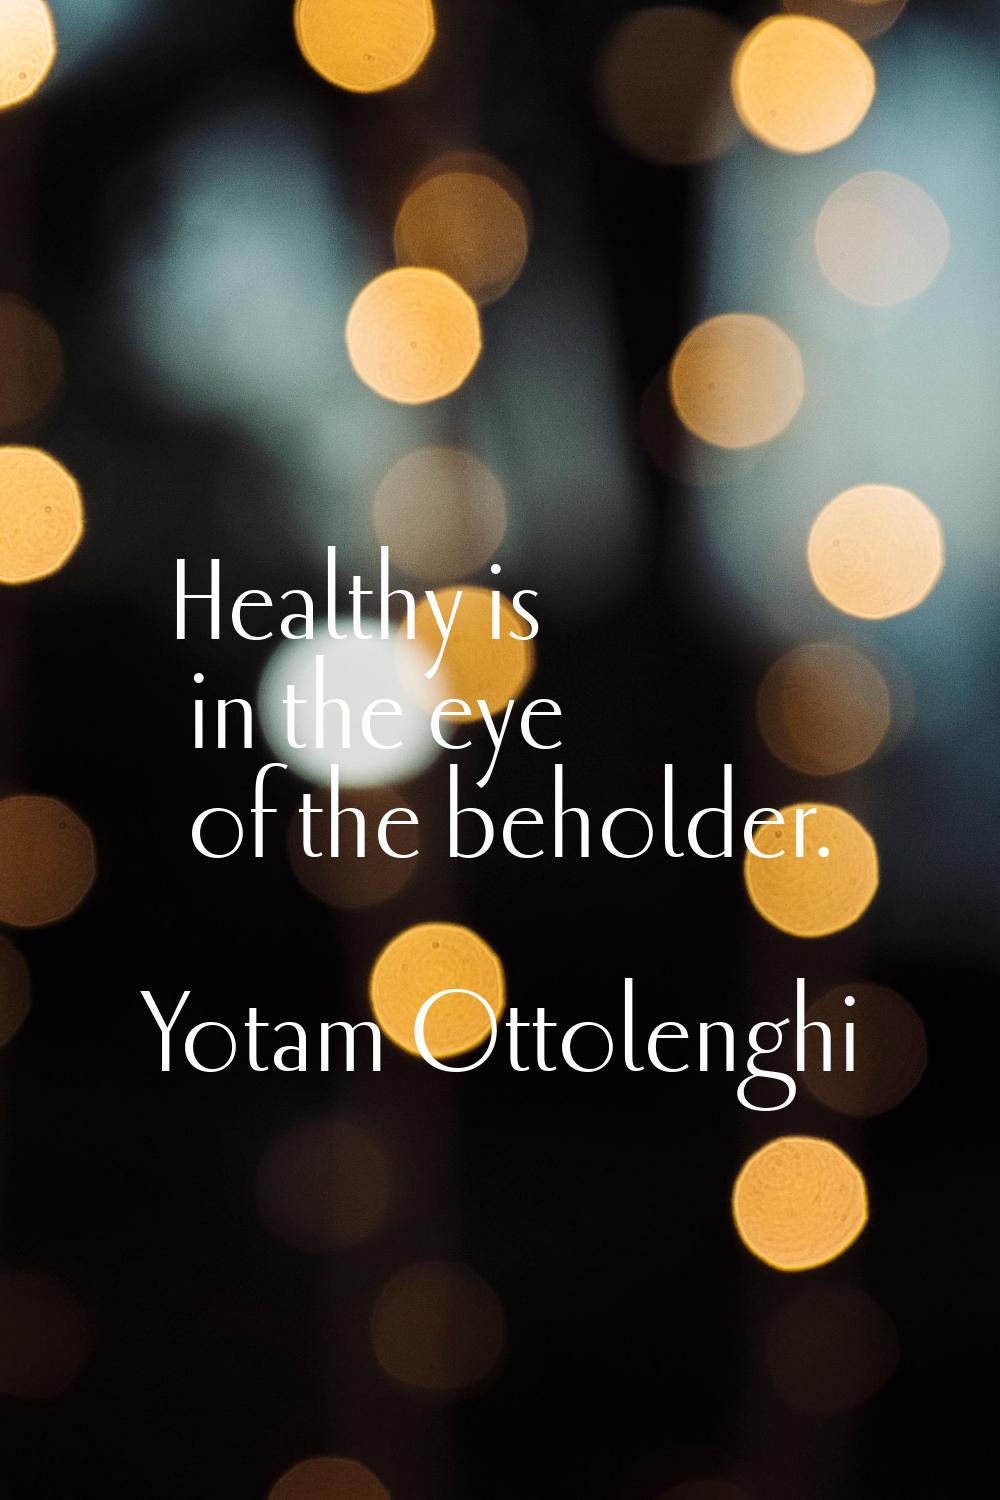 Healthy is in the eye of the beholder.